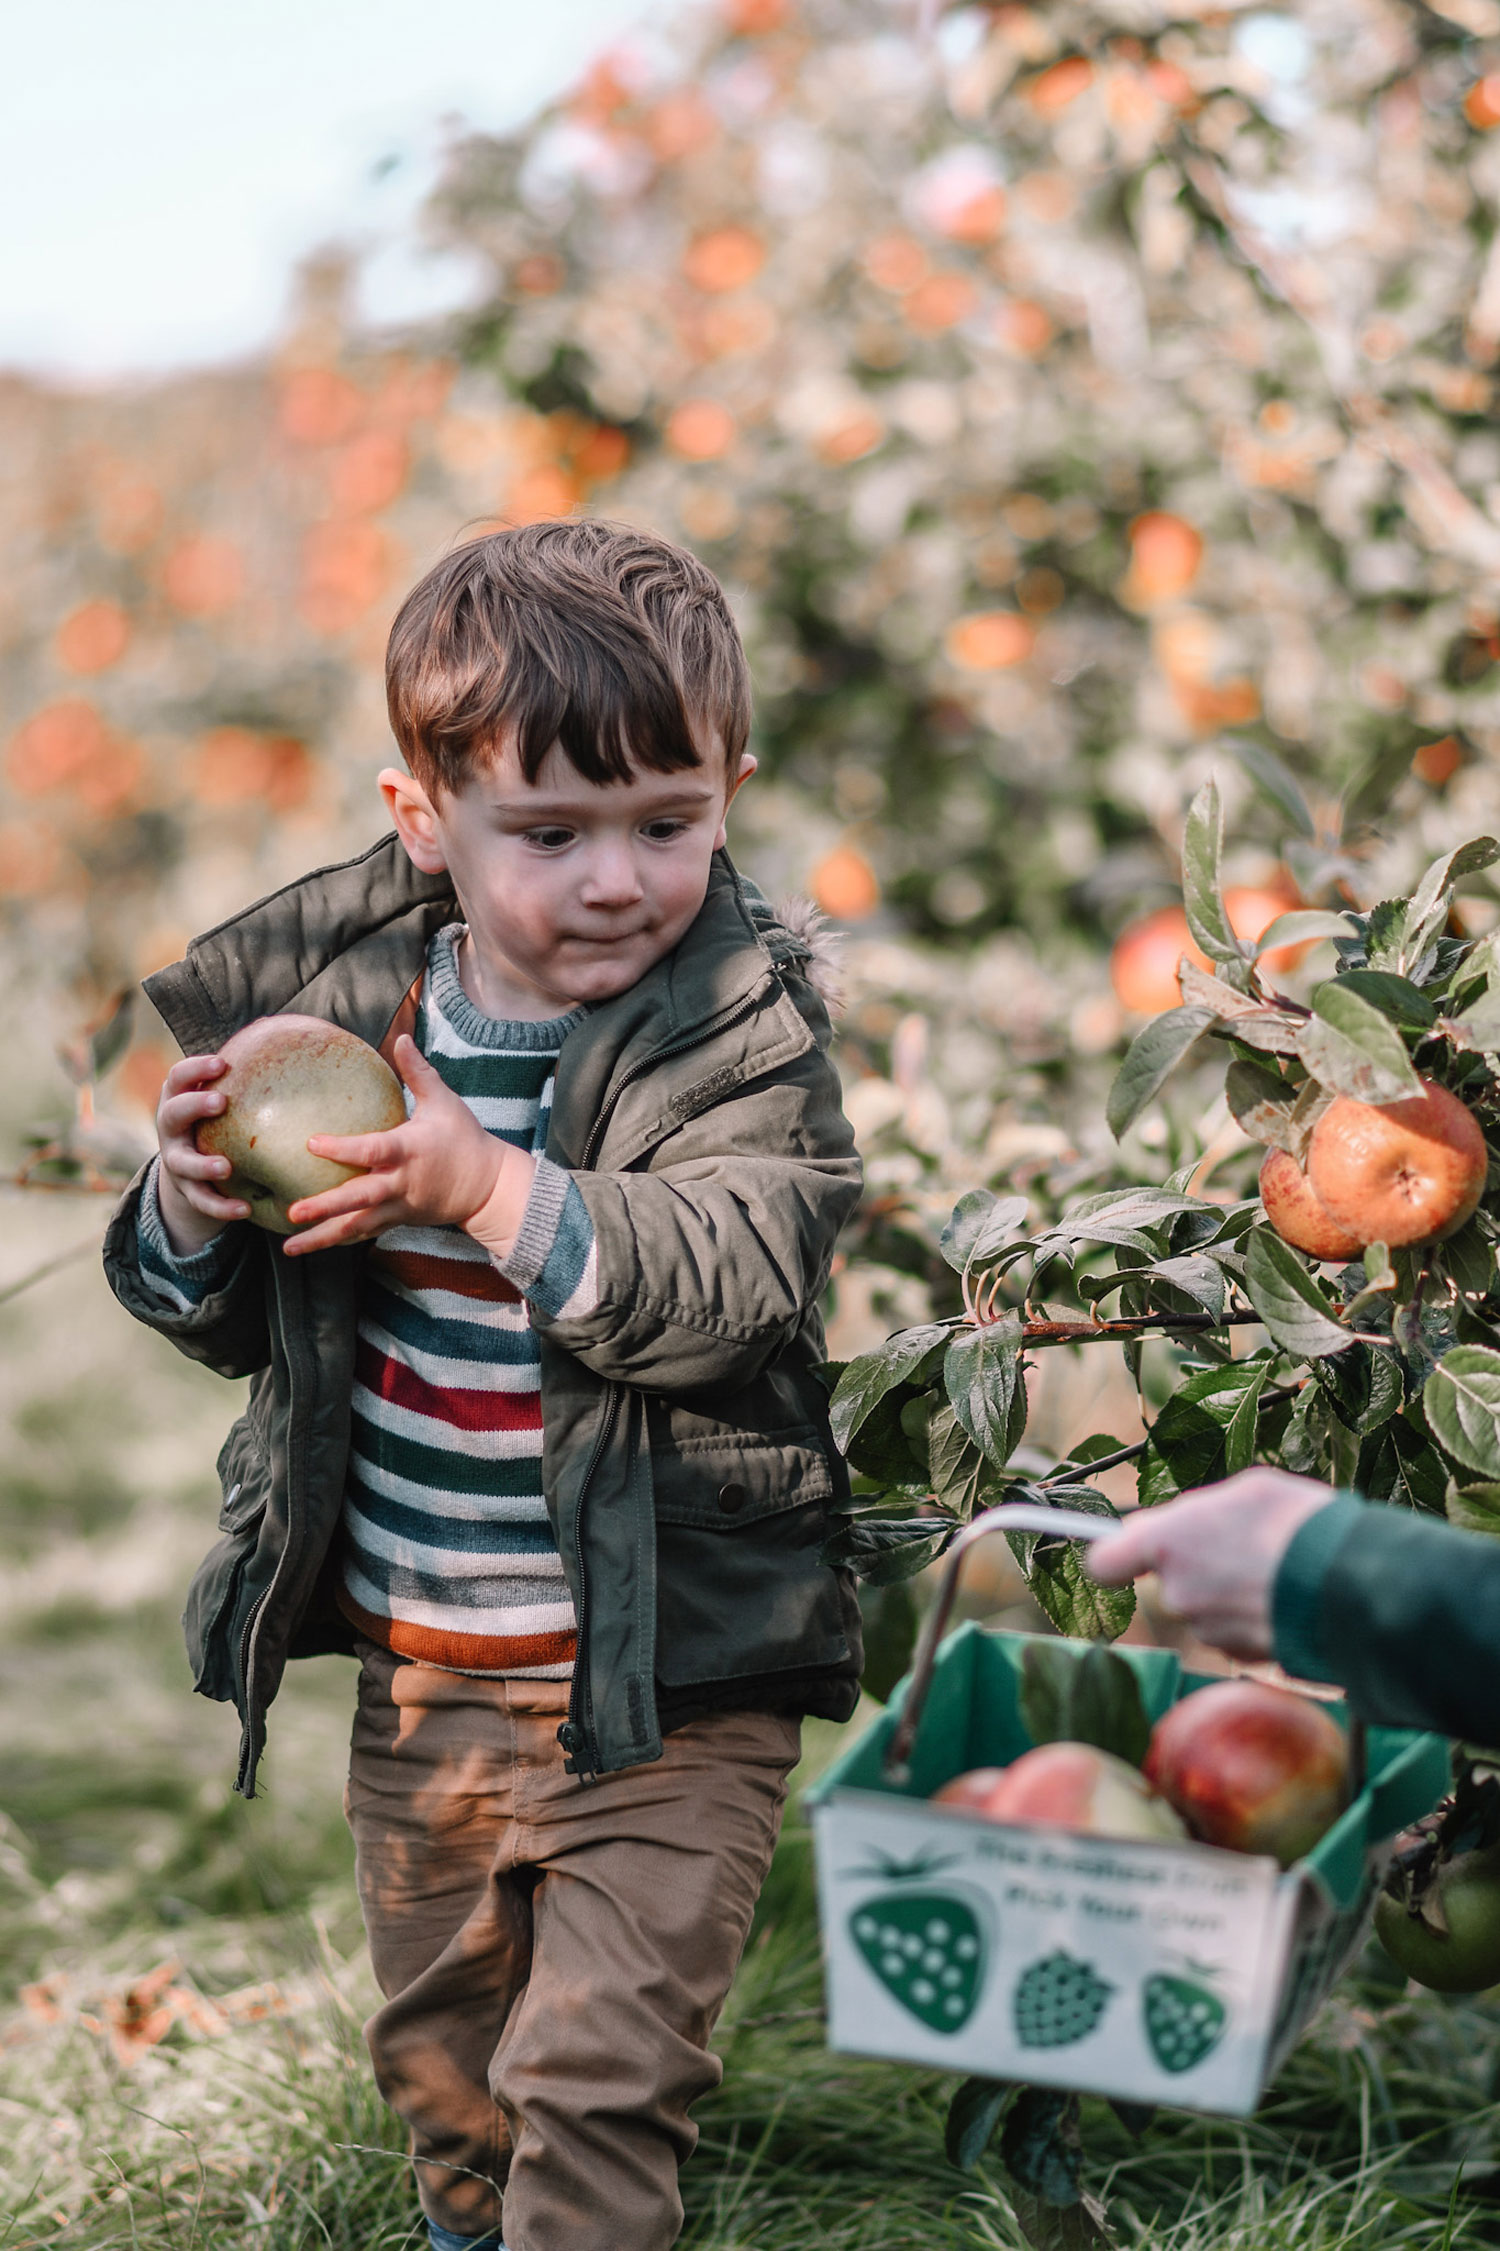 Toddler Max picking apples at the farm